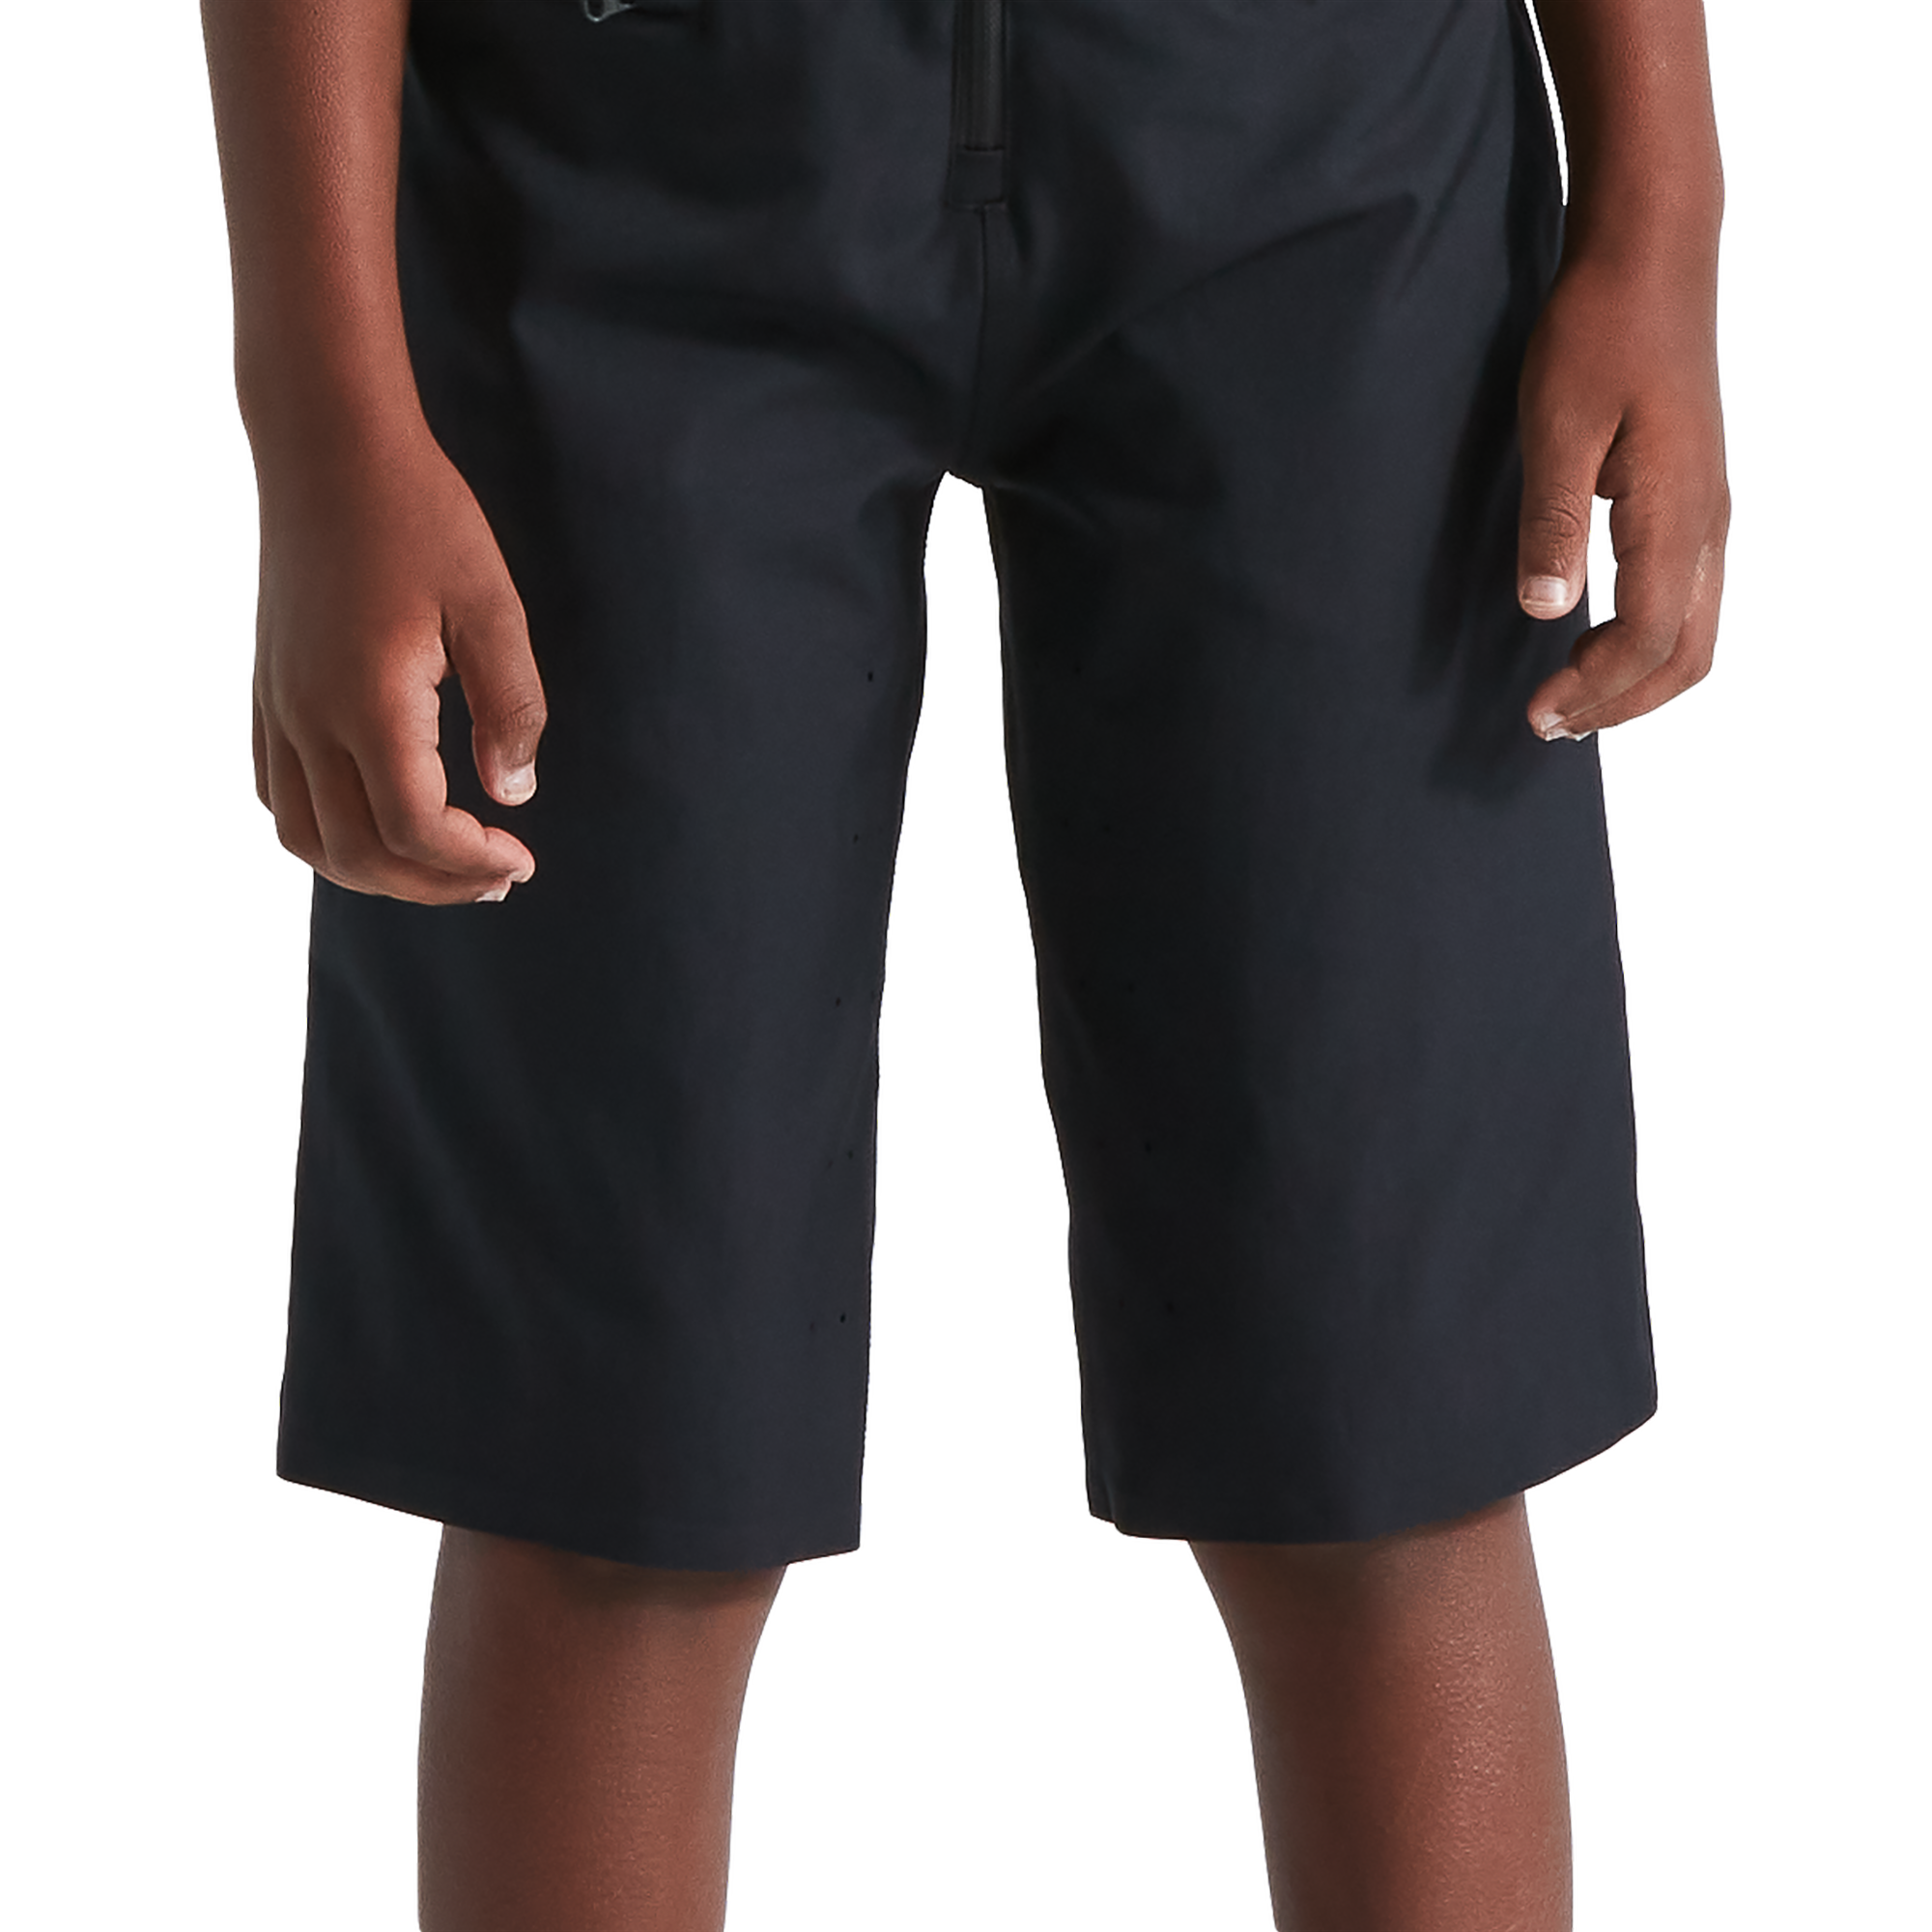 Youth Trail Short